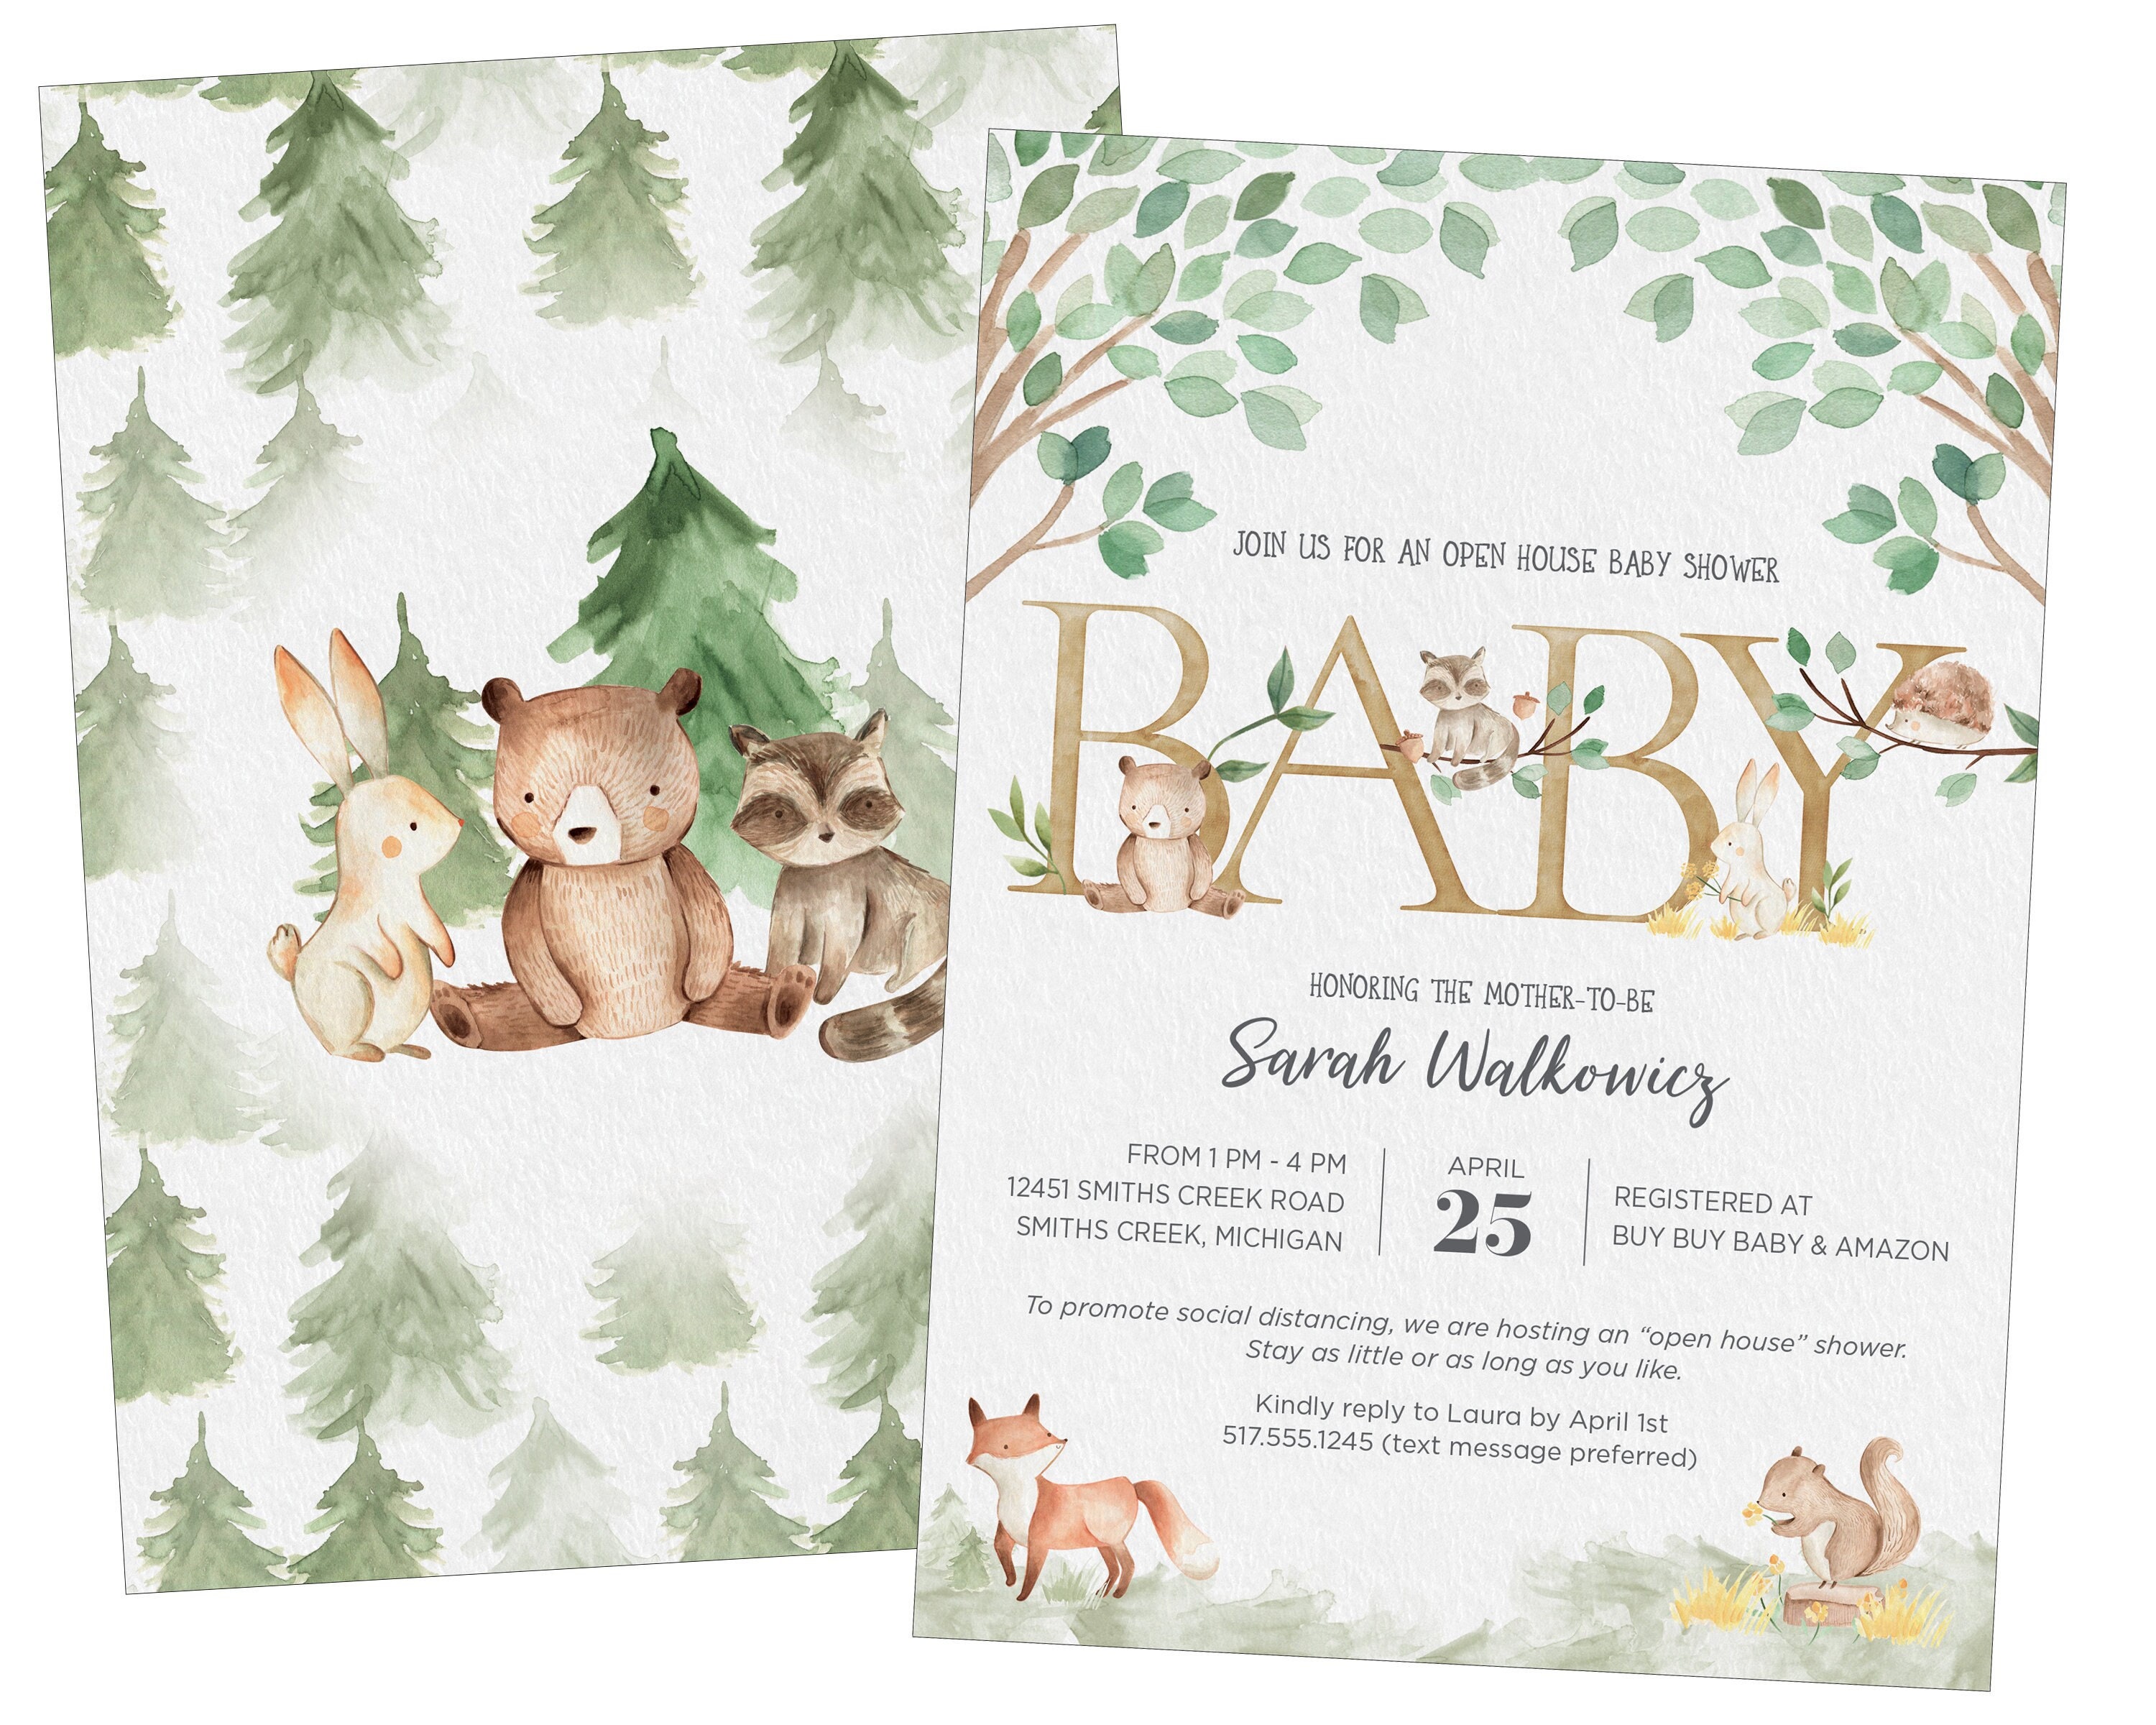 Rustic Invitations and Envelopes (Large Size 5x7) - Wedding - Engagement - Birthday Party - Baby Shower - Any Occasion - Wood and Lights (50 Count)